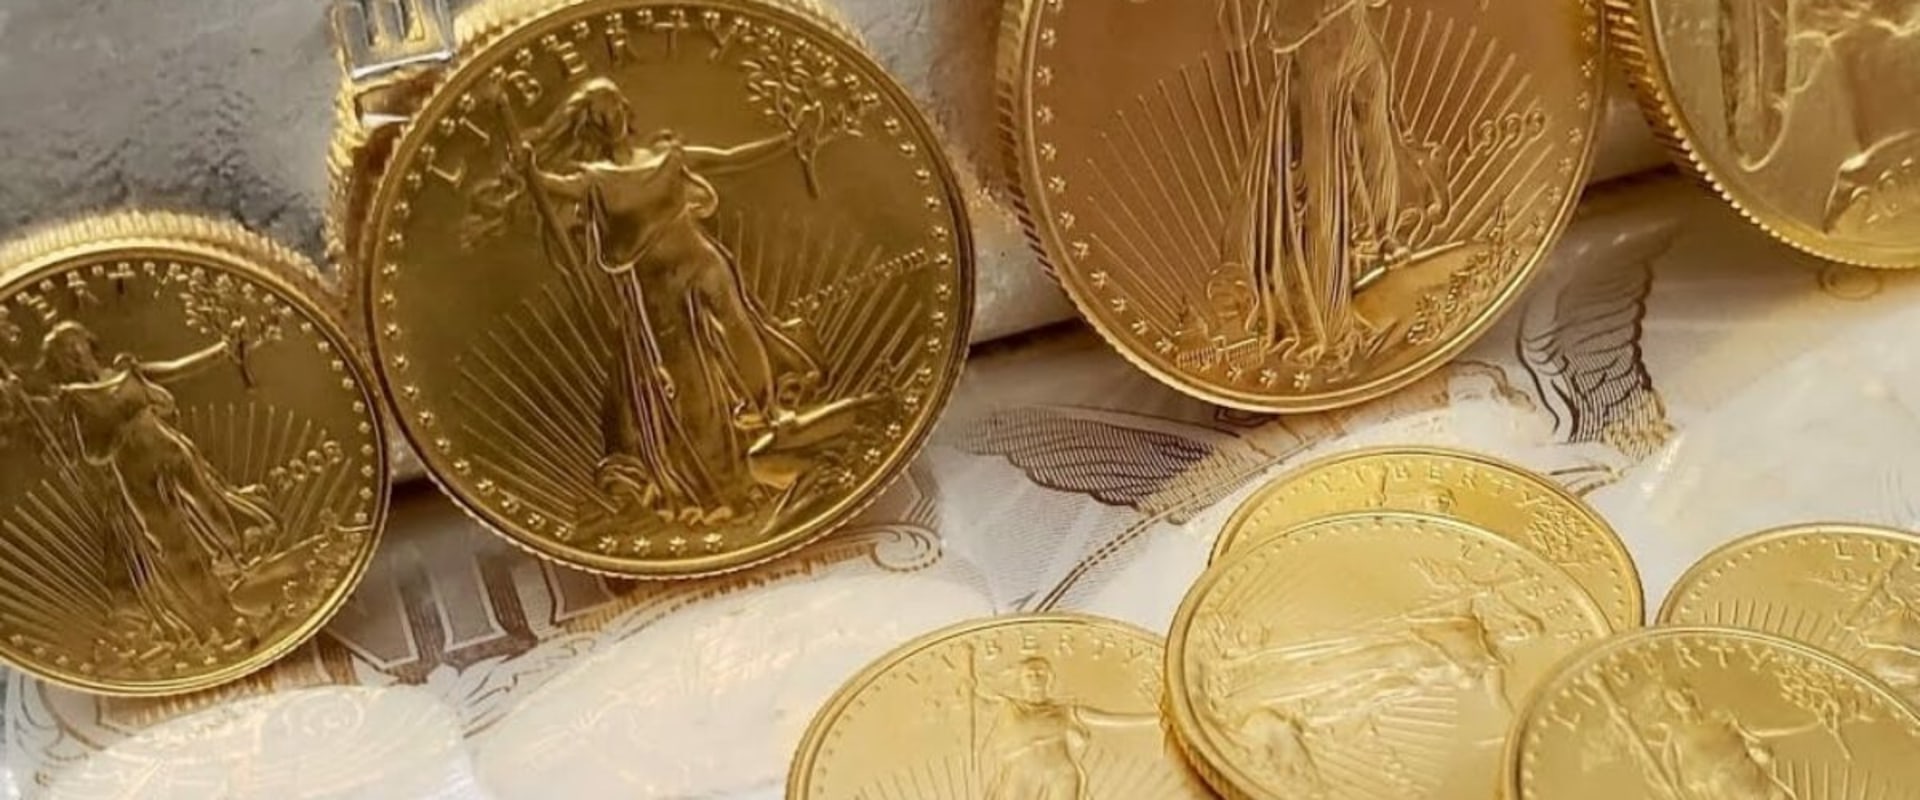 Is it better to own gold coins or bars?